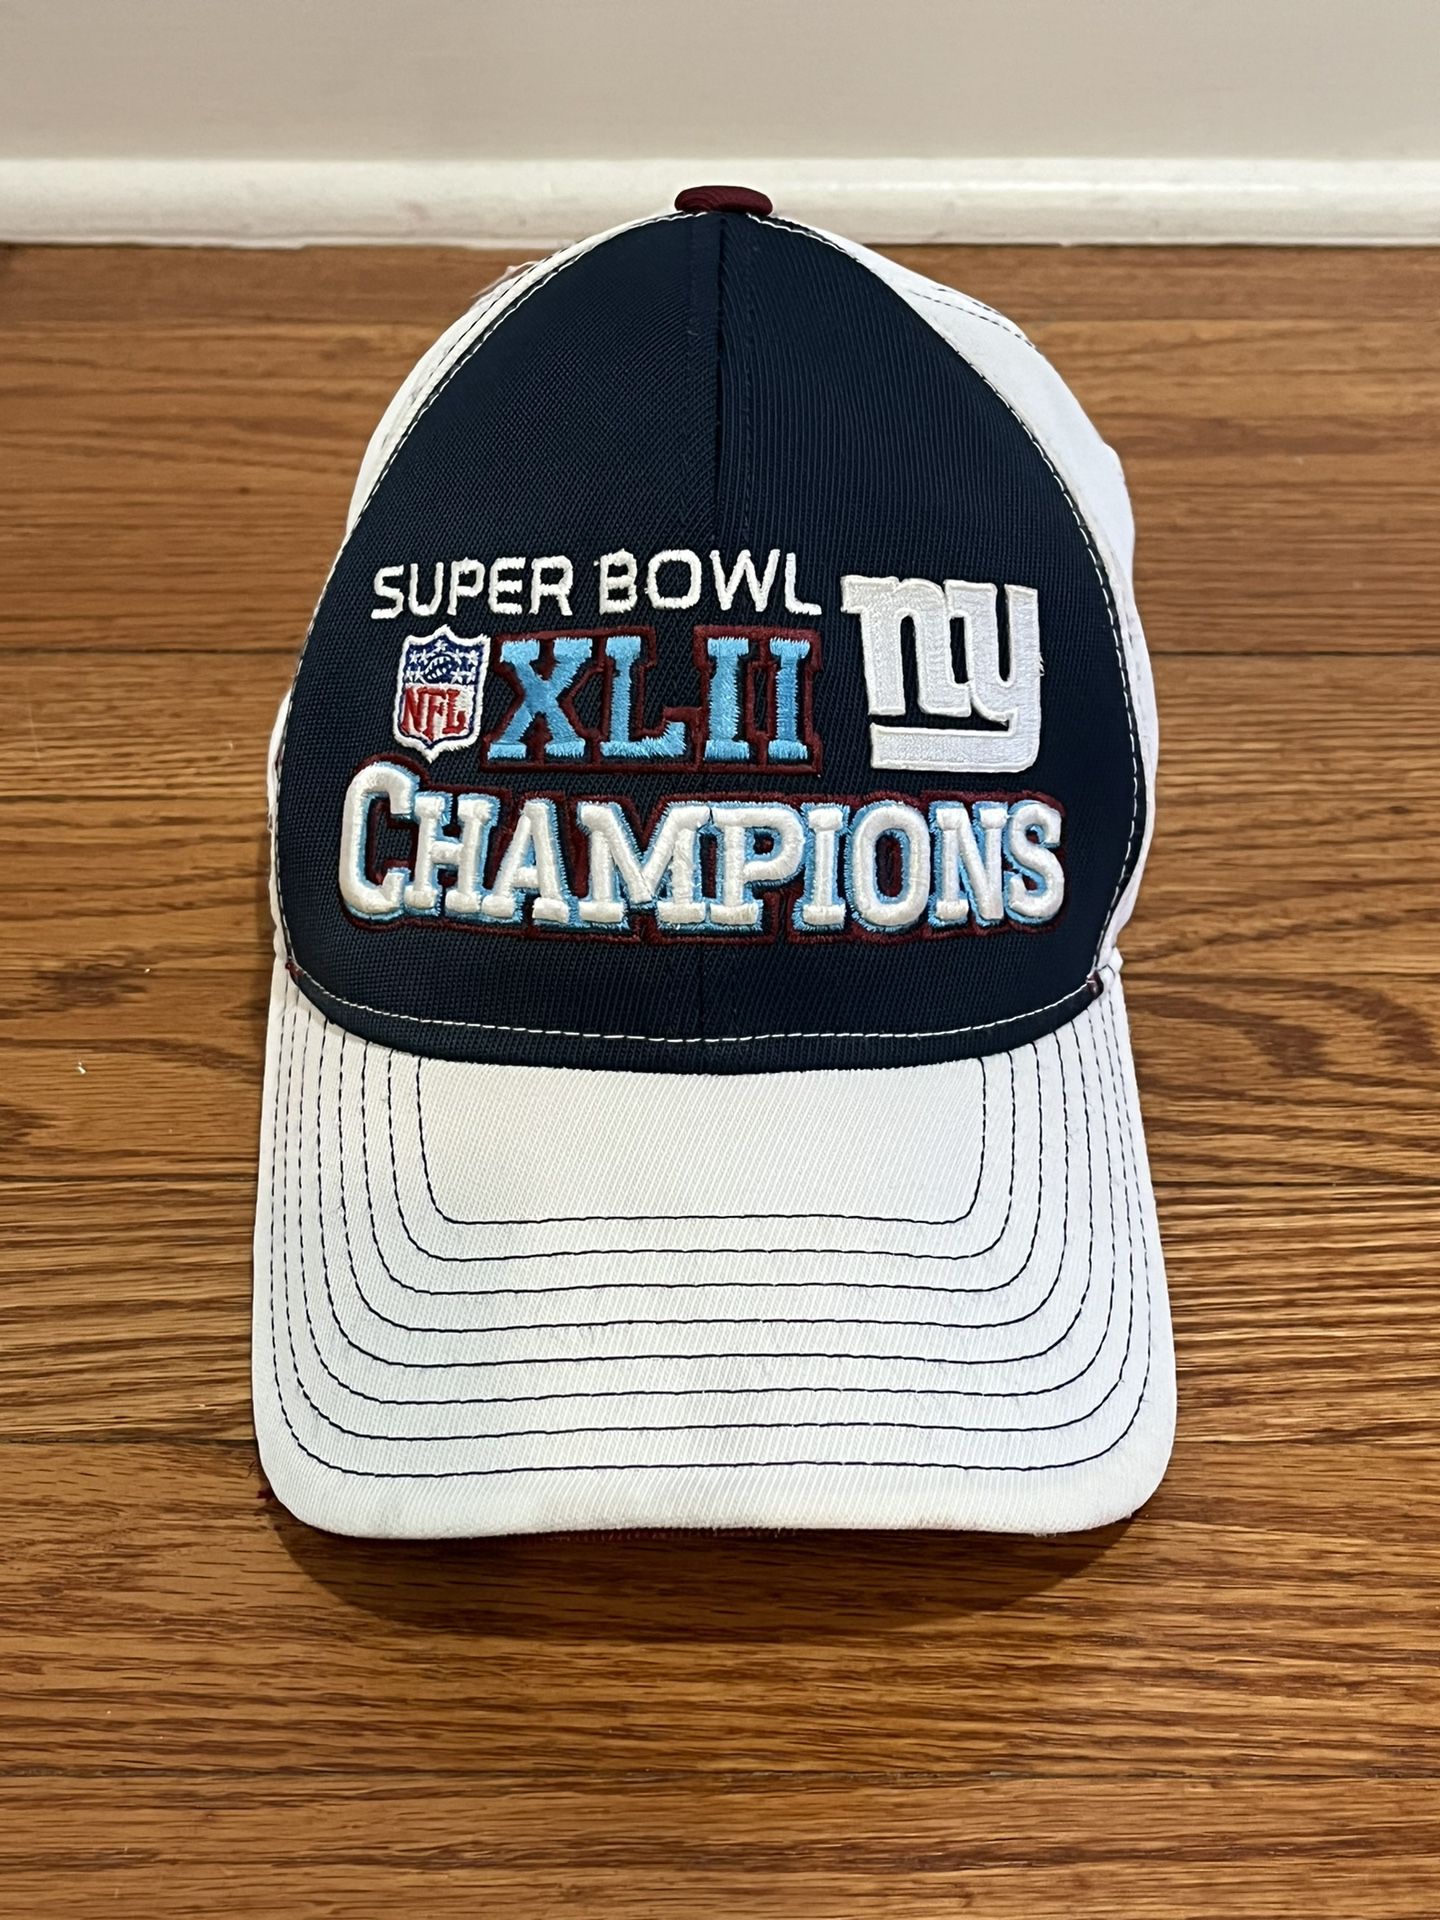 New York Giants Super Bowl XLII super Bowl Champions NFL Football Baseball Hat Authentic Preowned 